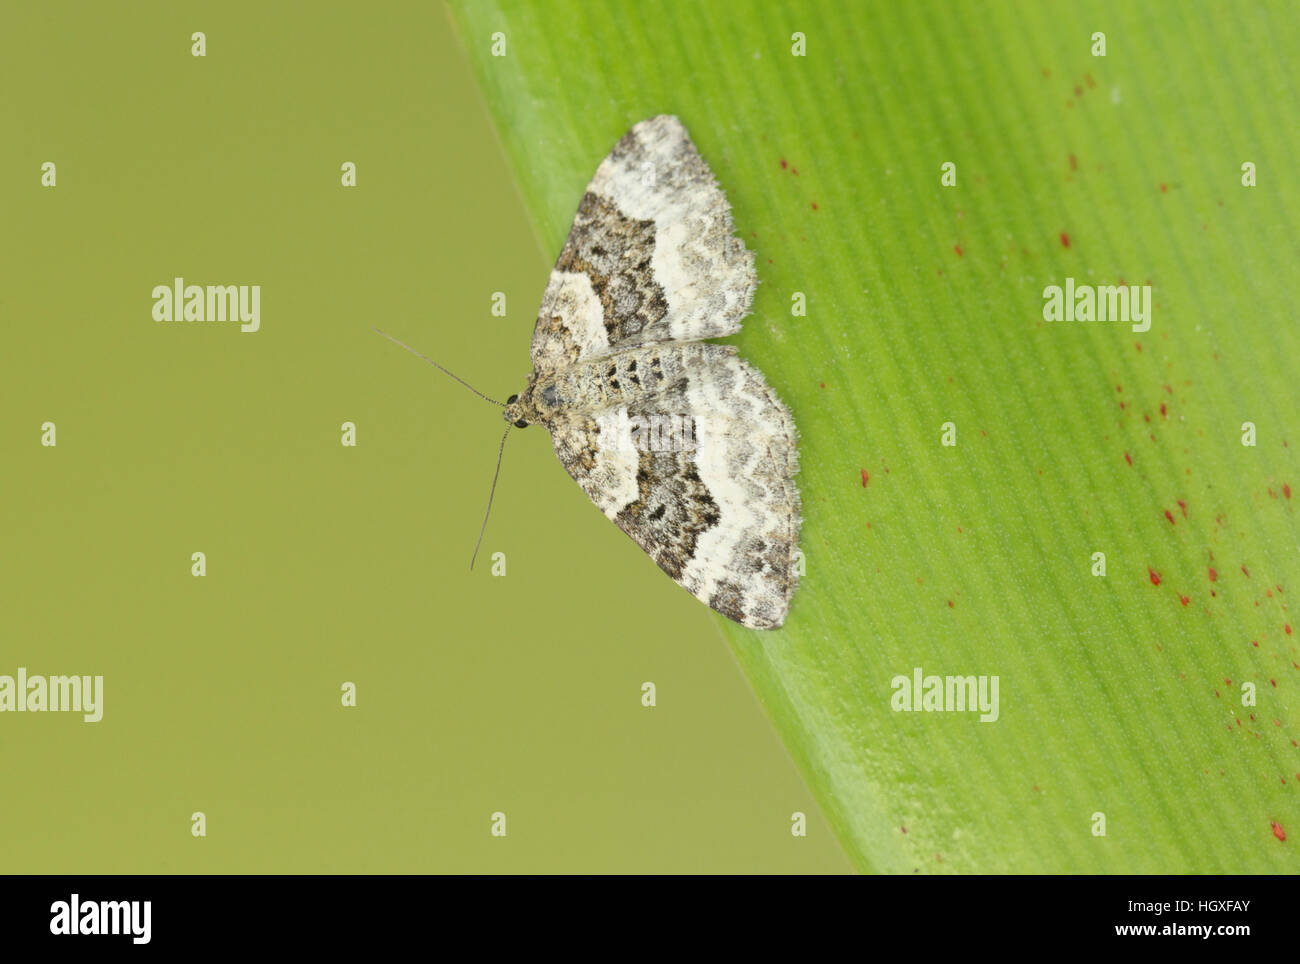 Galium Carpet (Epirrhoe galiata), a black-and-white moth perched on green vegetation, against a clean green background Stock Photo